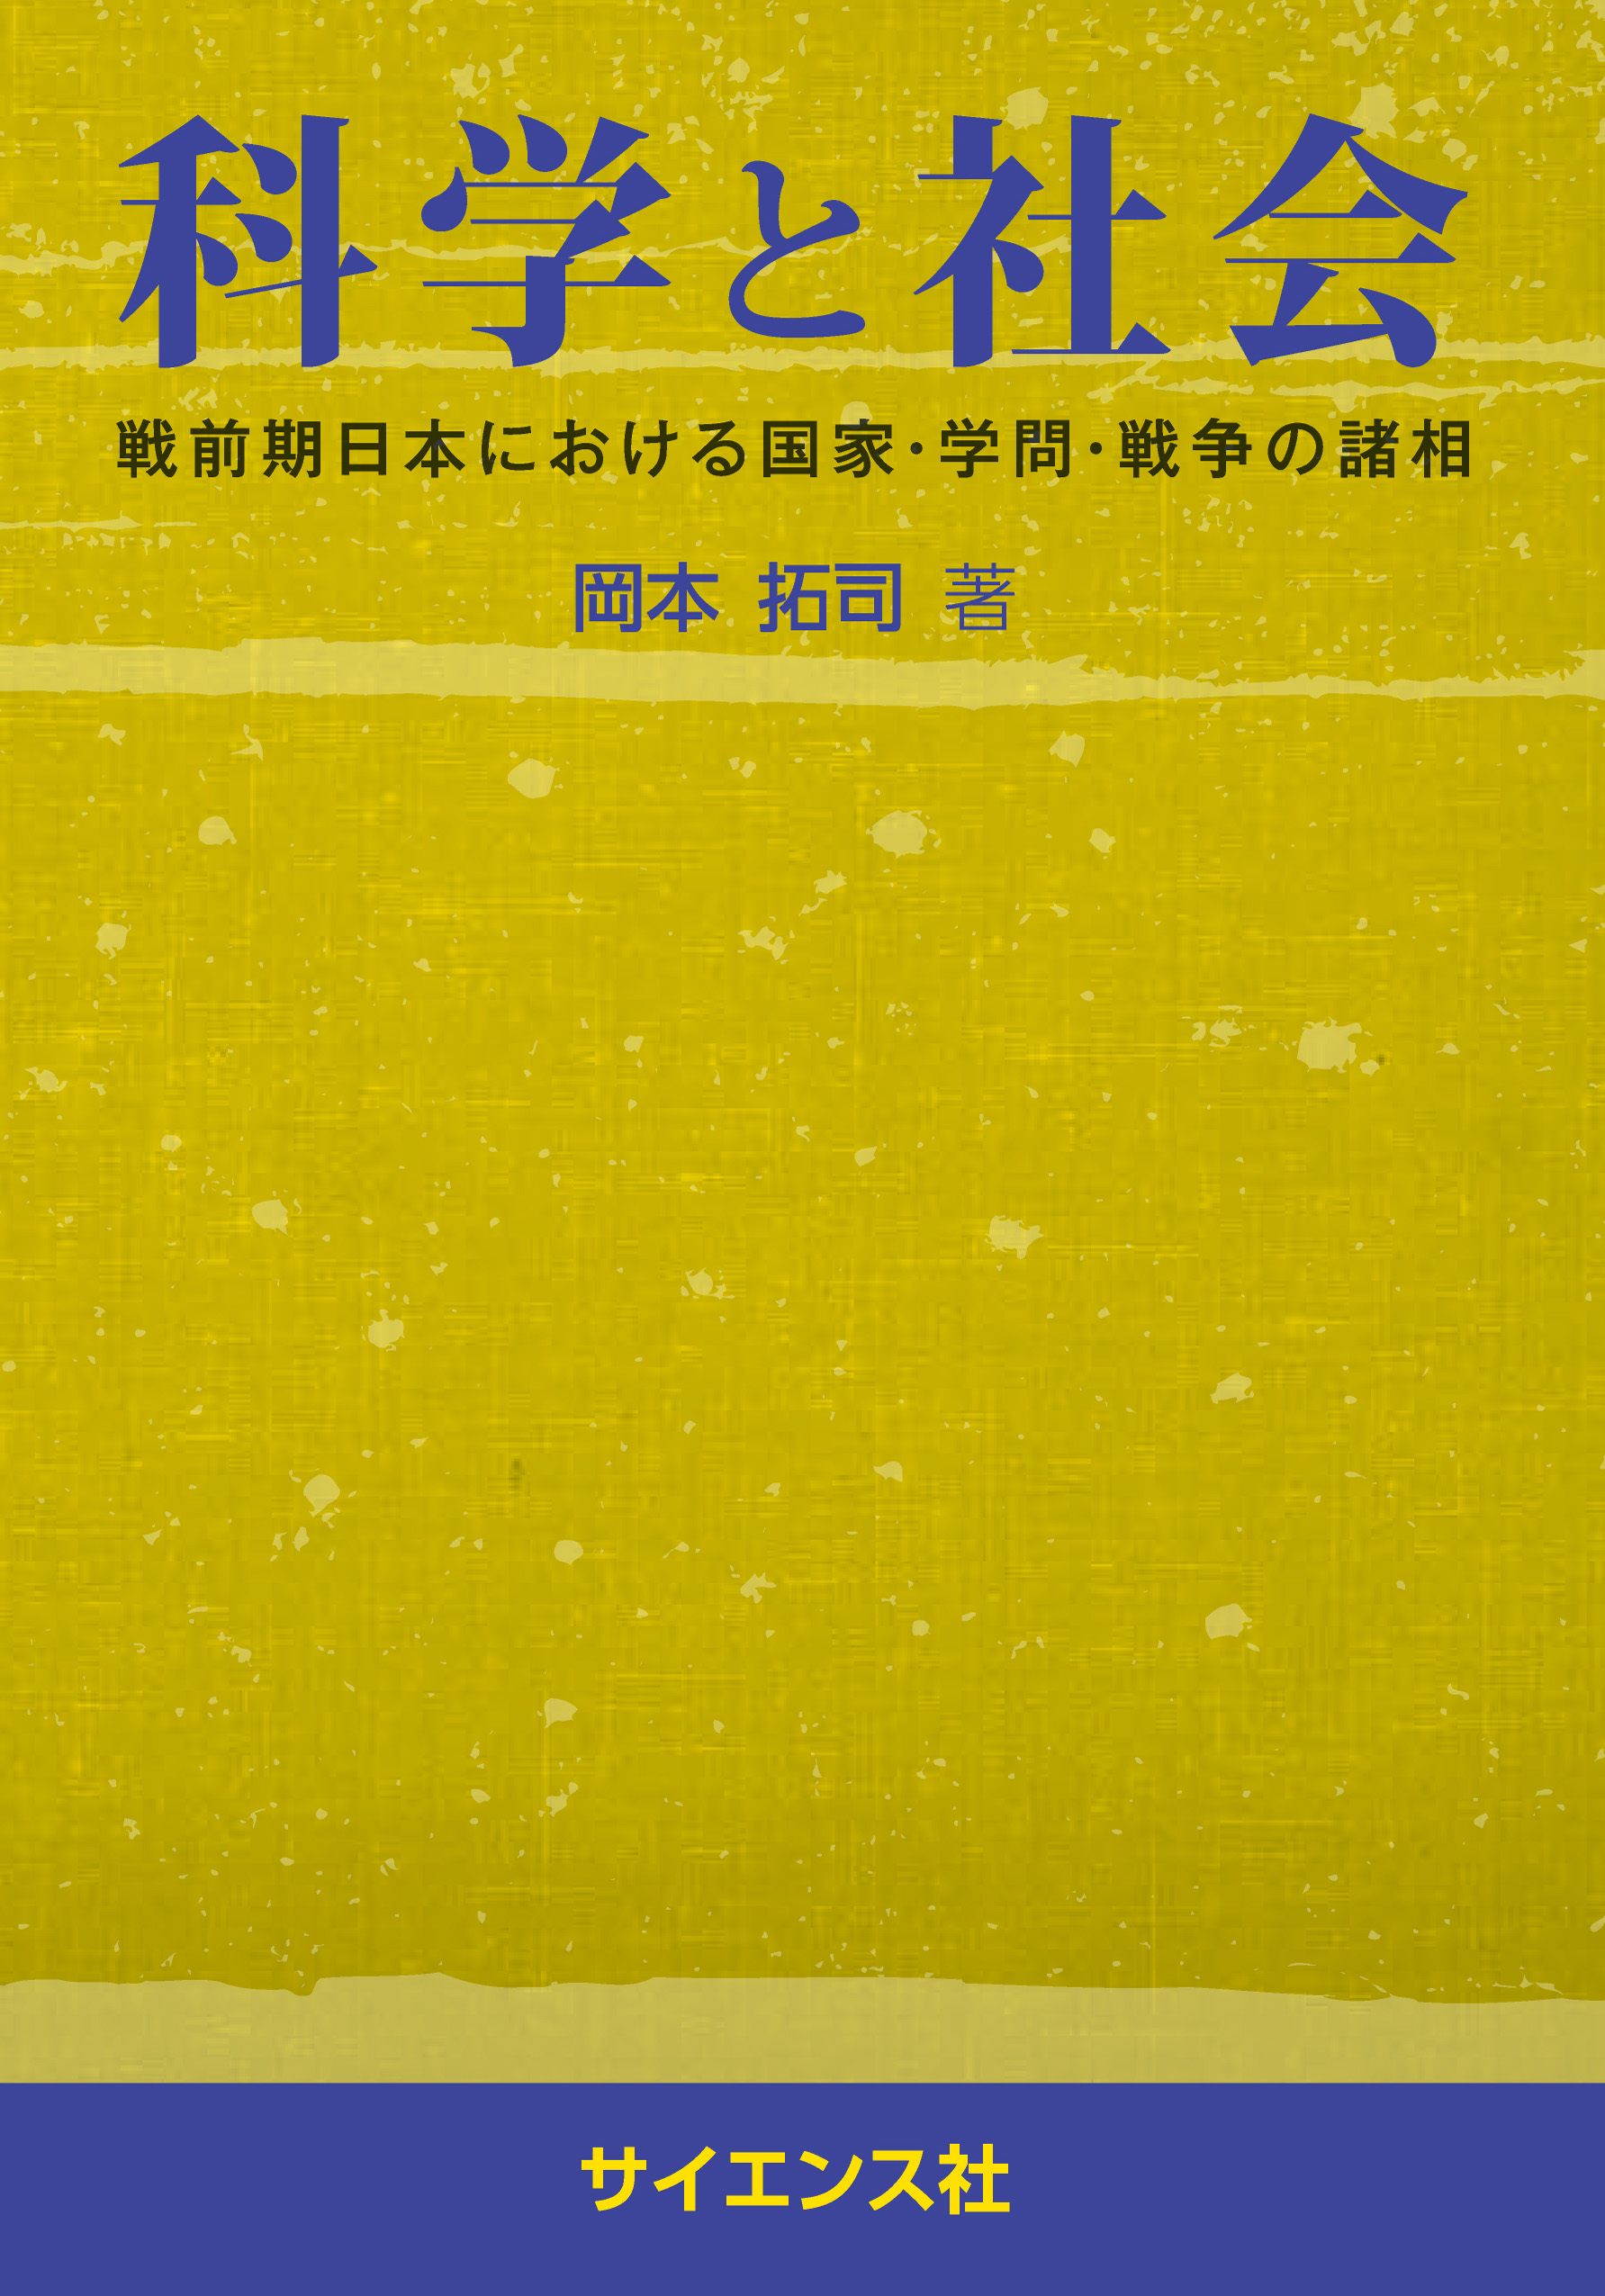 Cover of blue and mustard color